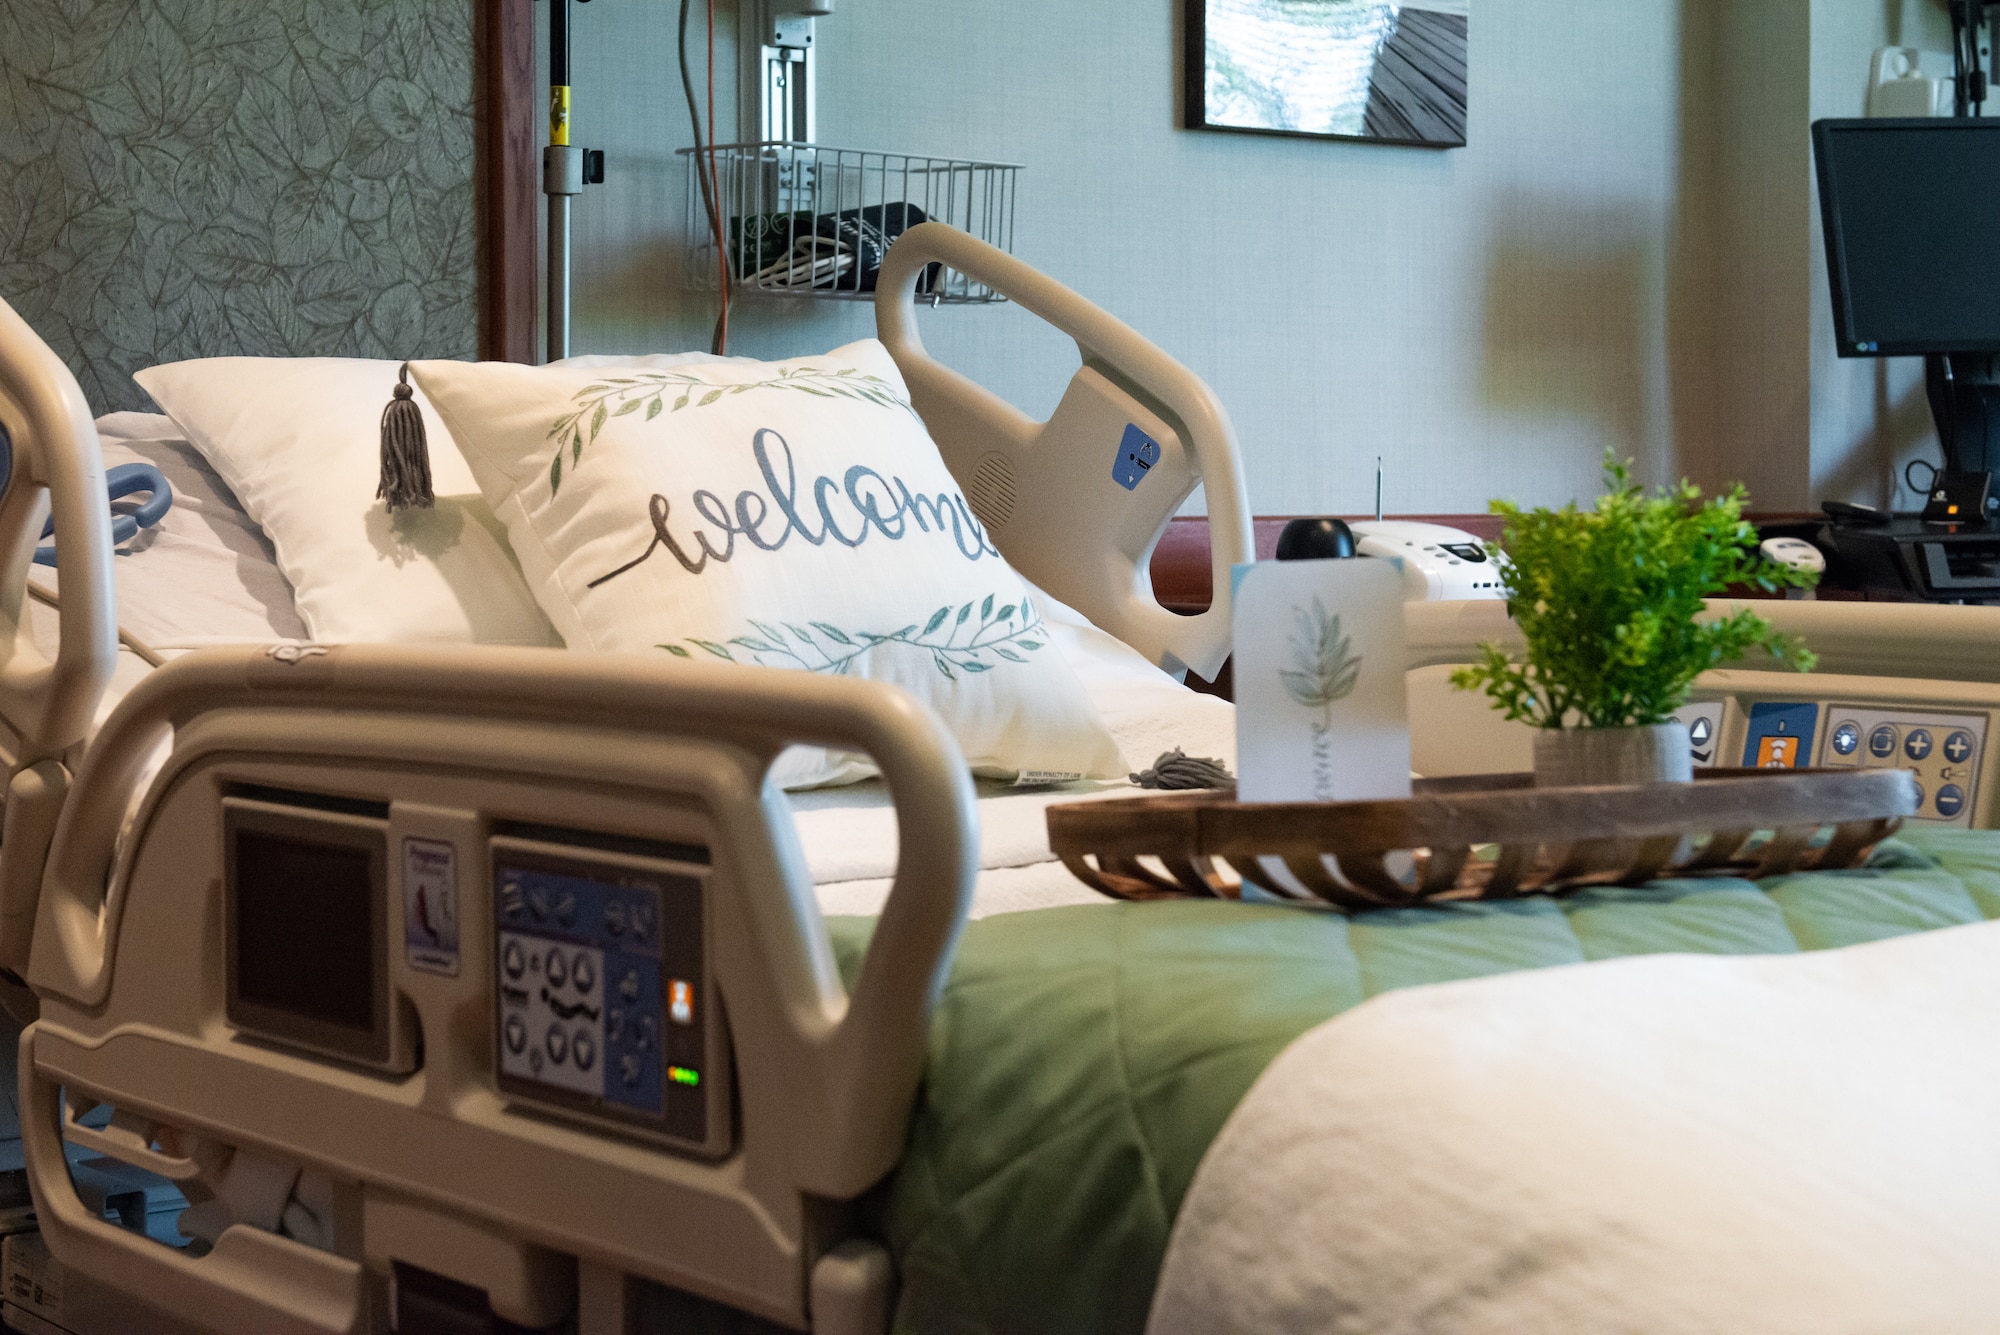 A hospital bed personalized with a white decorative pillow, a green and white blanket, and a wooden tray with a small plant on top of it.